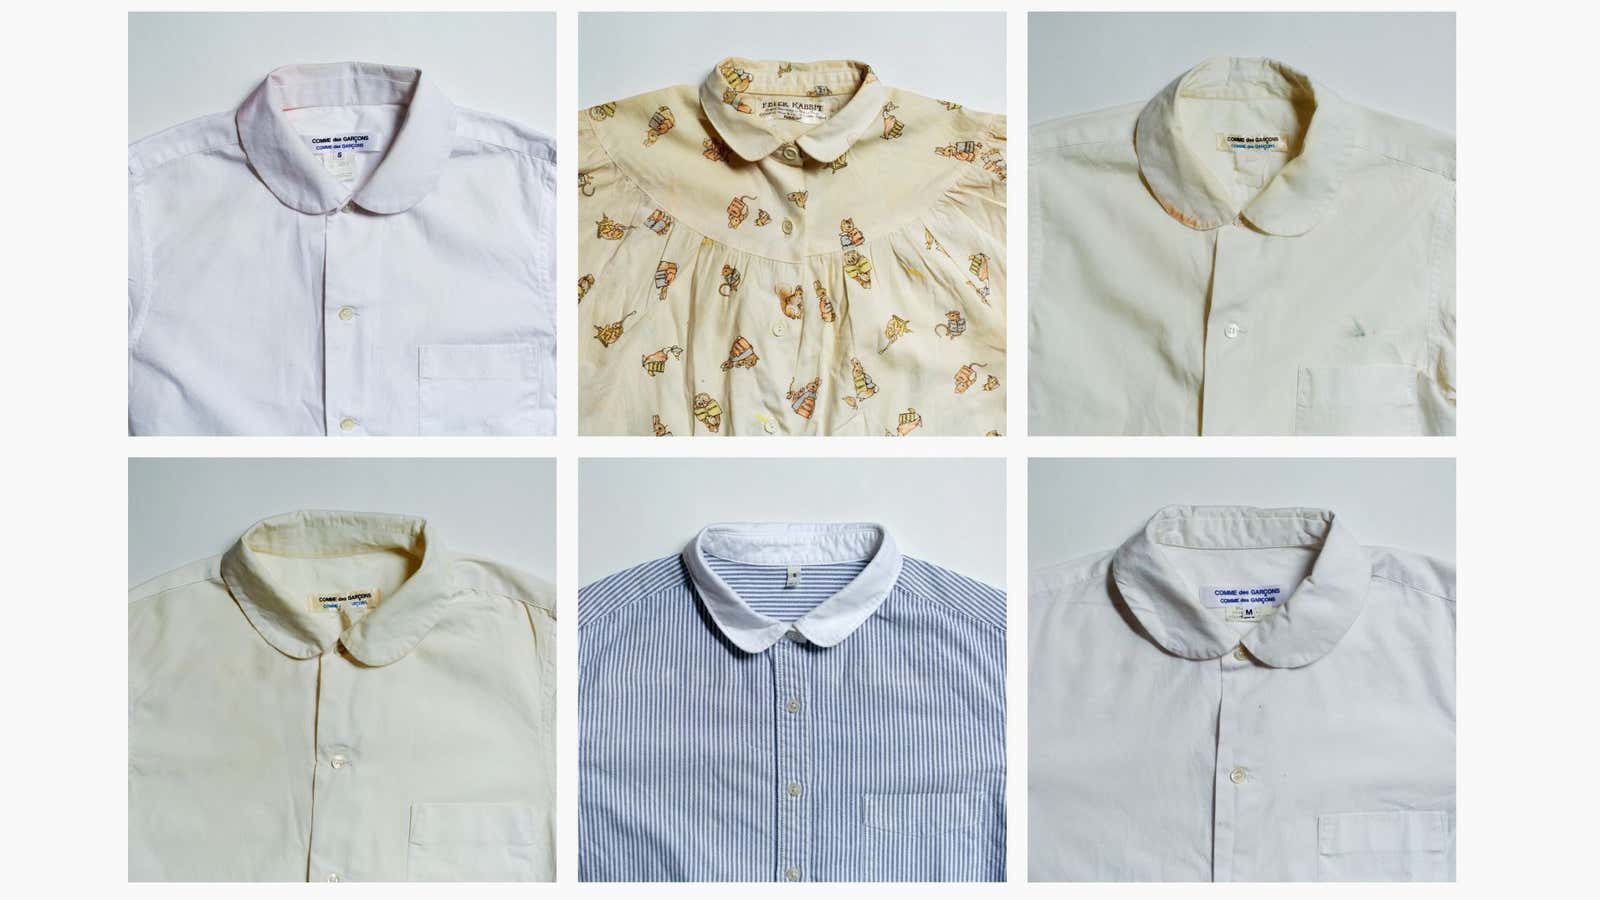 One piece of the collections that appear in Women in Clothes: Miranda Purves’ shirts with Peter Pan Collars.